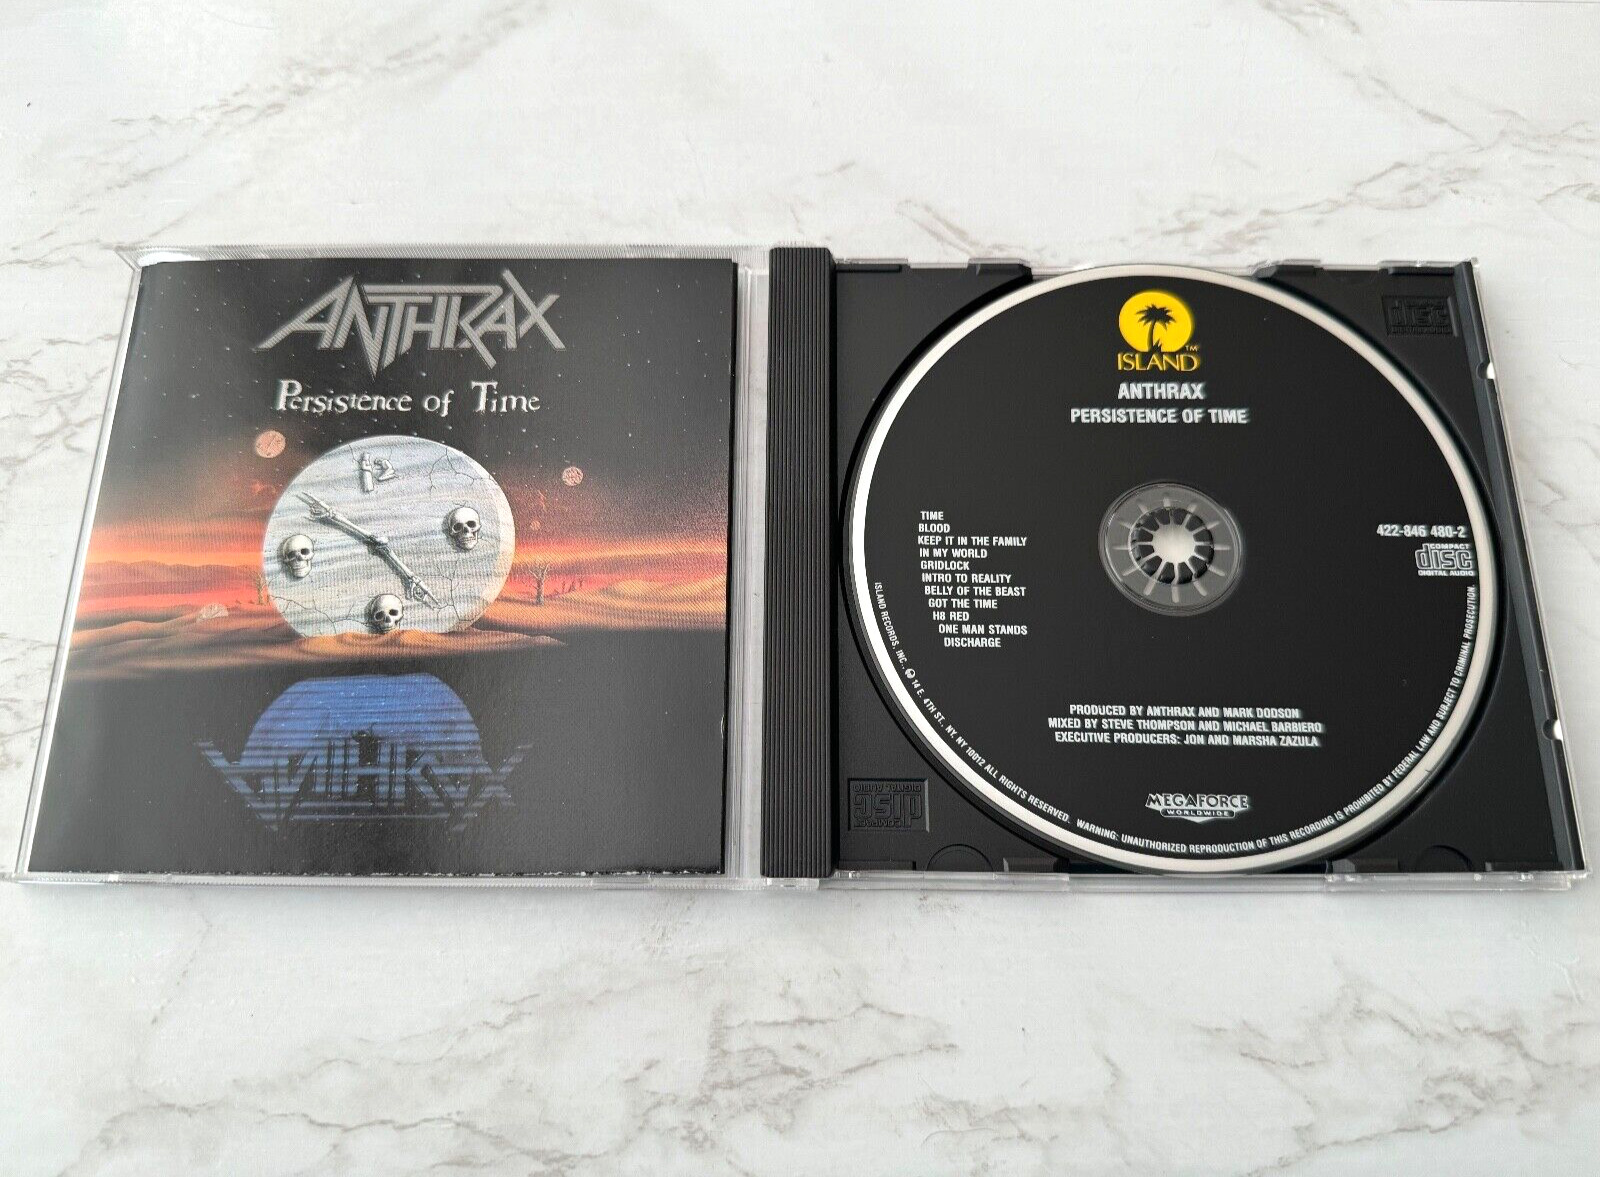 Anthrax Persistence Of Time CD Megaforce/Island 422-846 480-2 Discharge, Slayer